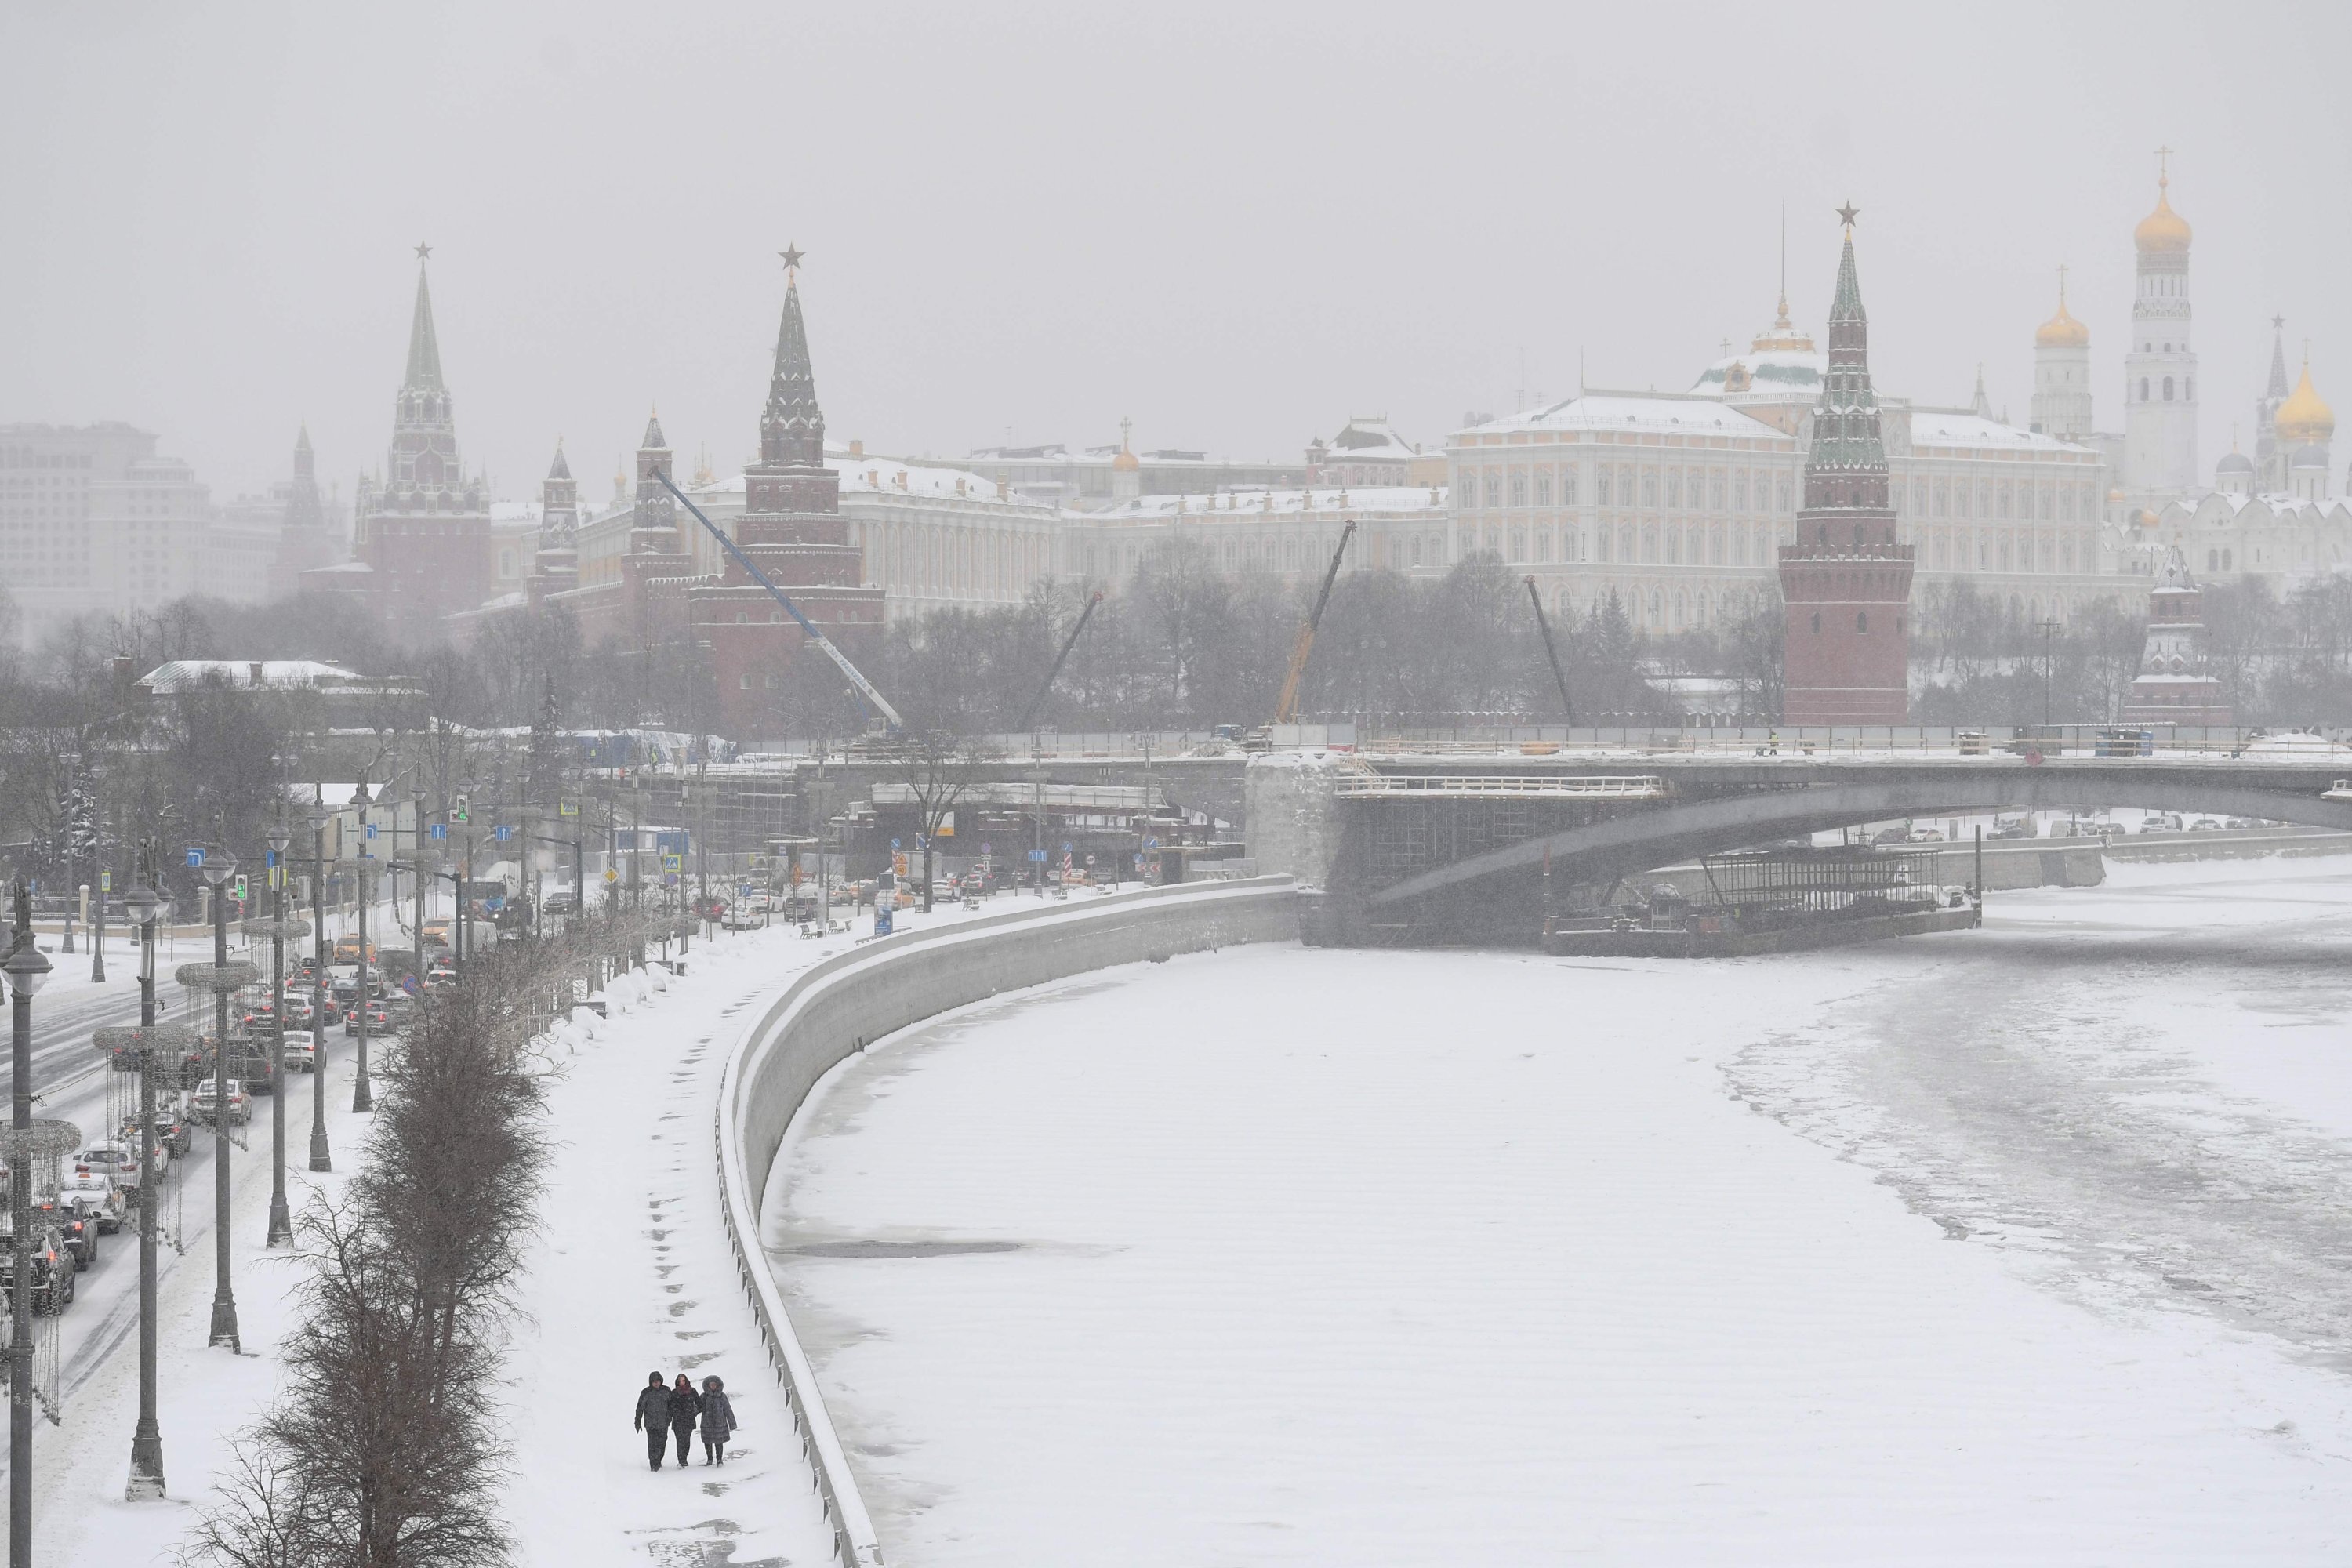 People walk along an embankment of the Moskva River with the Kremlin in the background during a heavy snowfall in Moscow on Feb. 12, 2021. (AFP Photo)